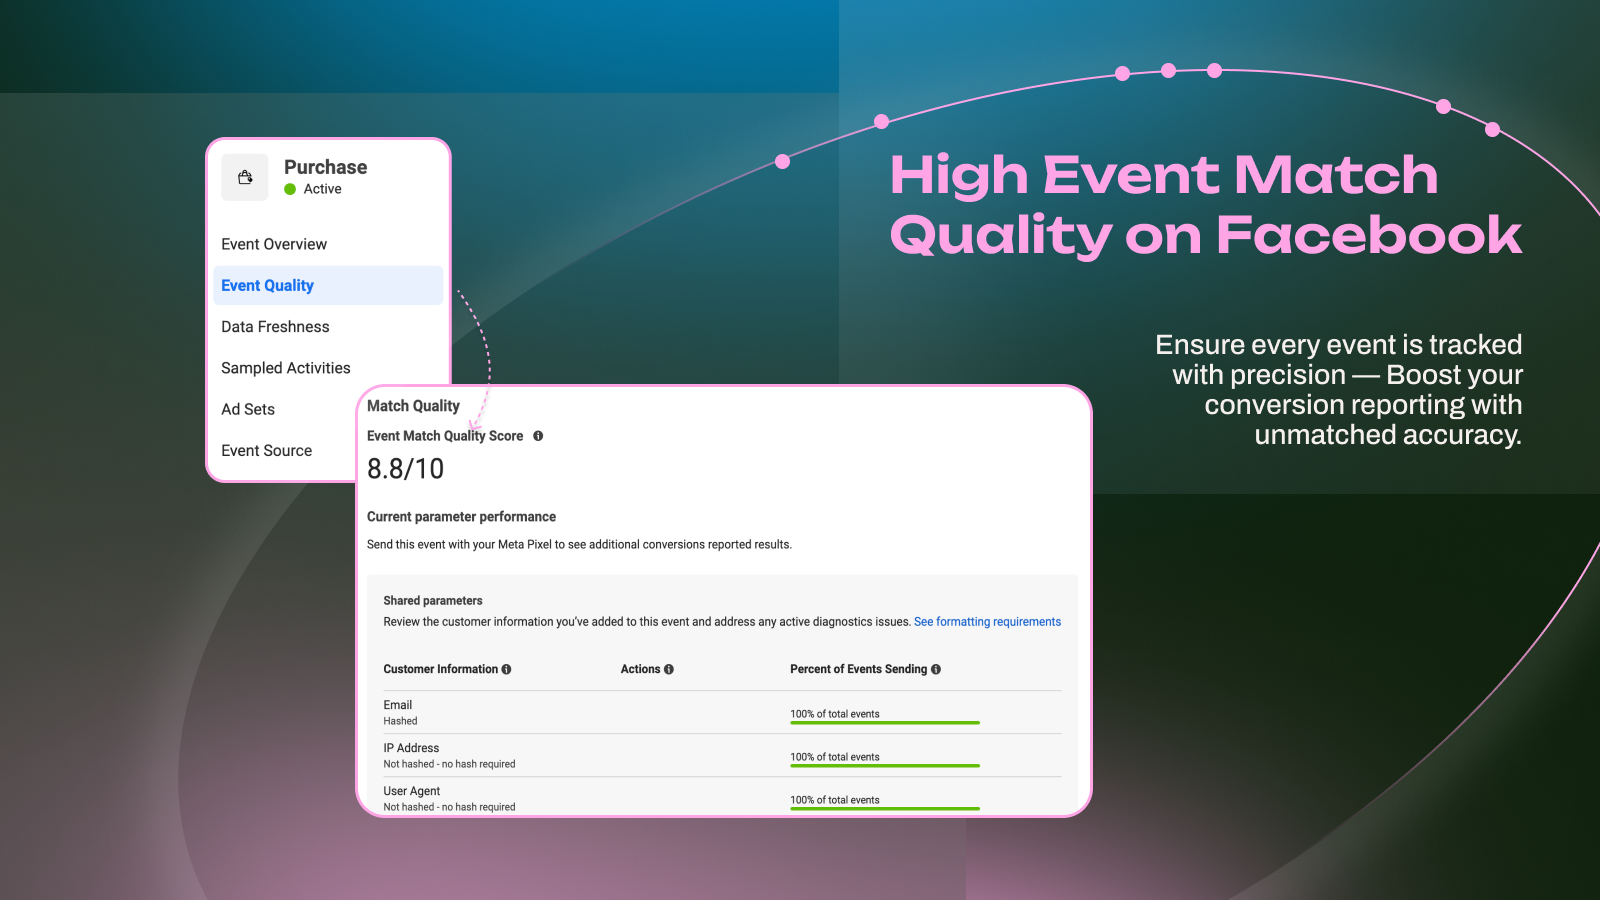 Get all server-side tracking events